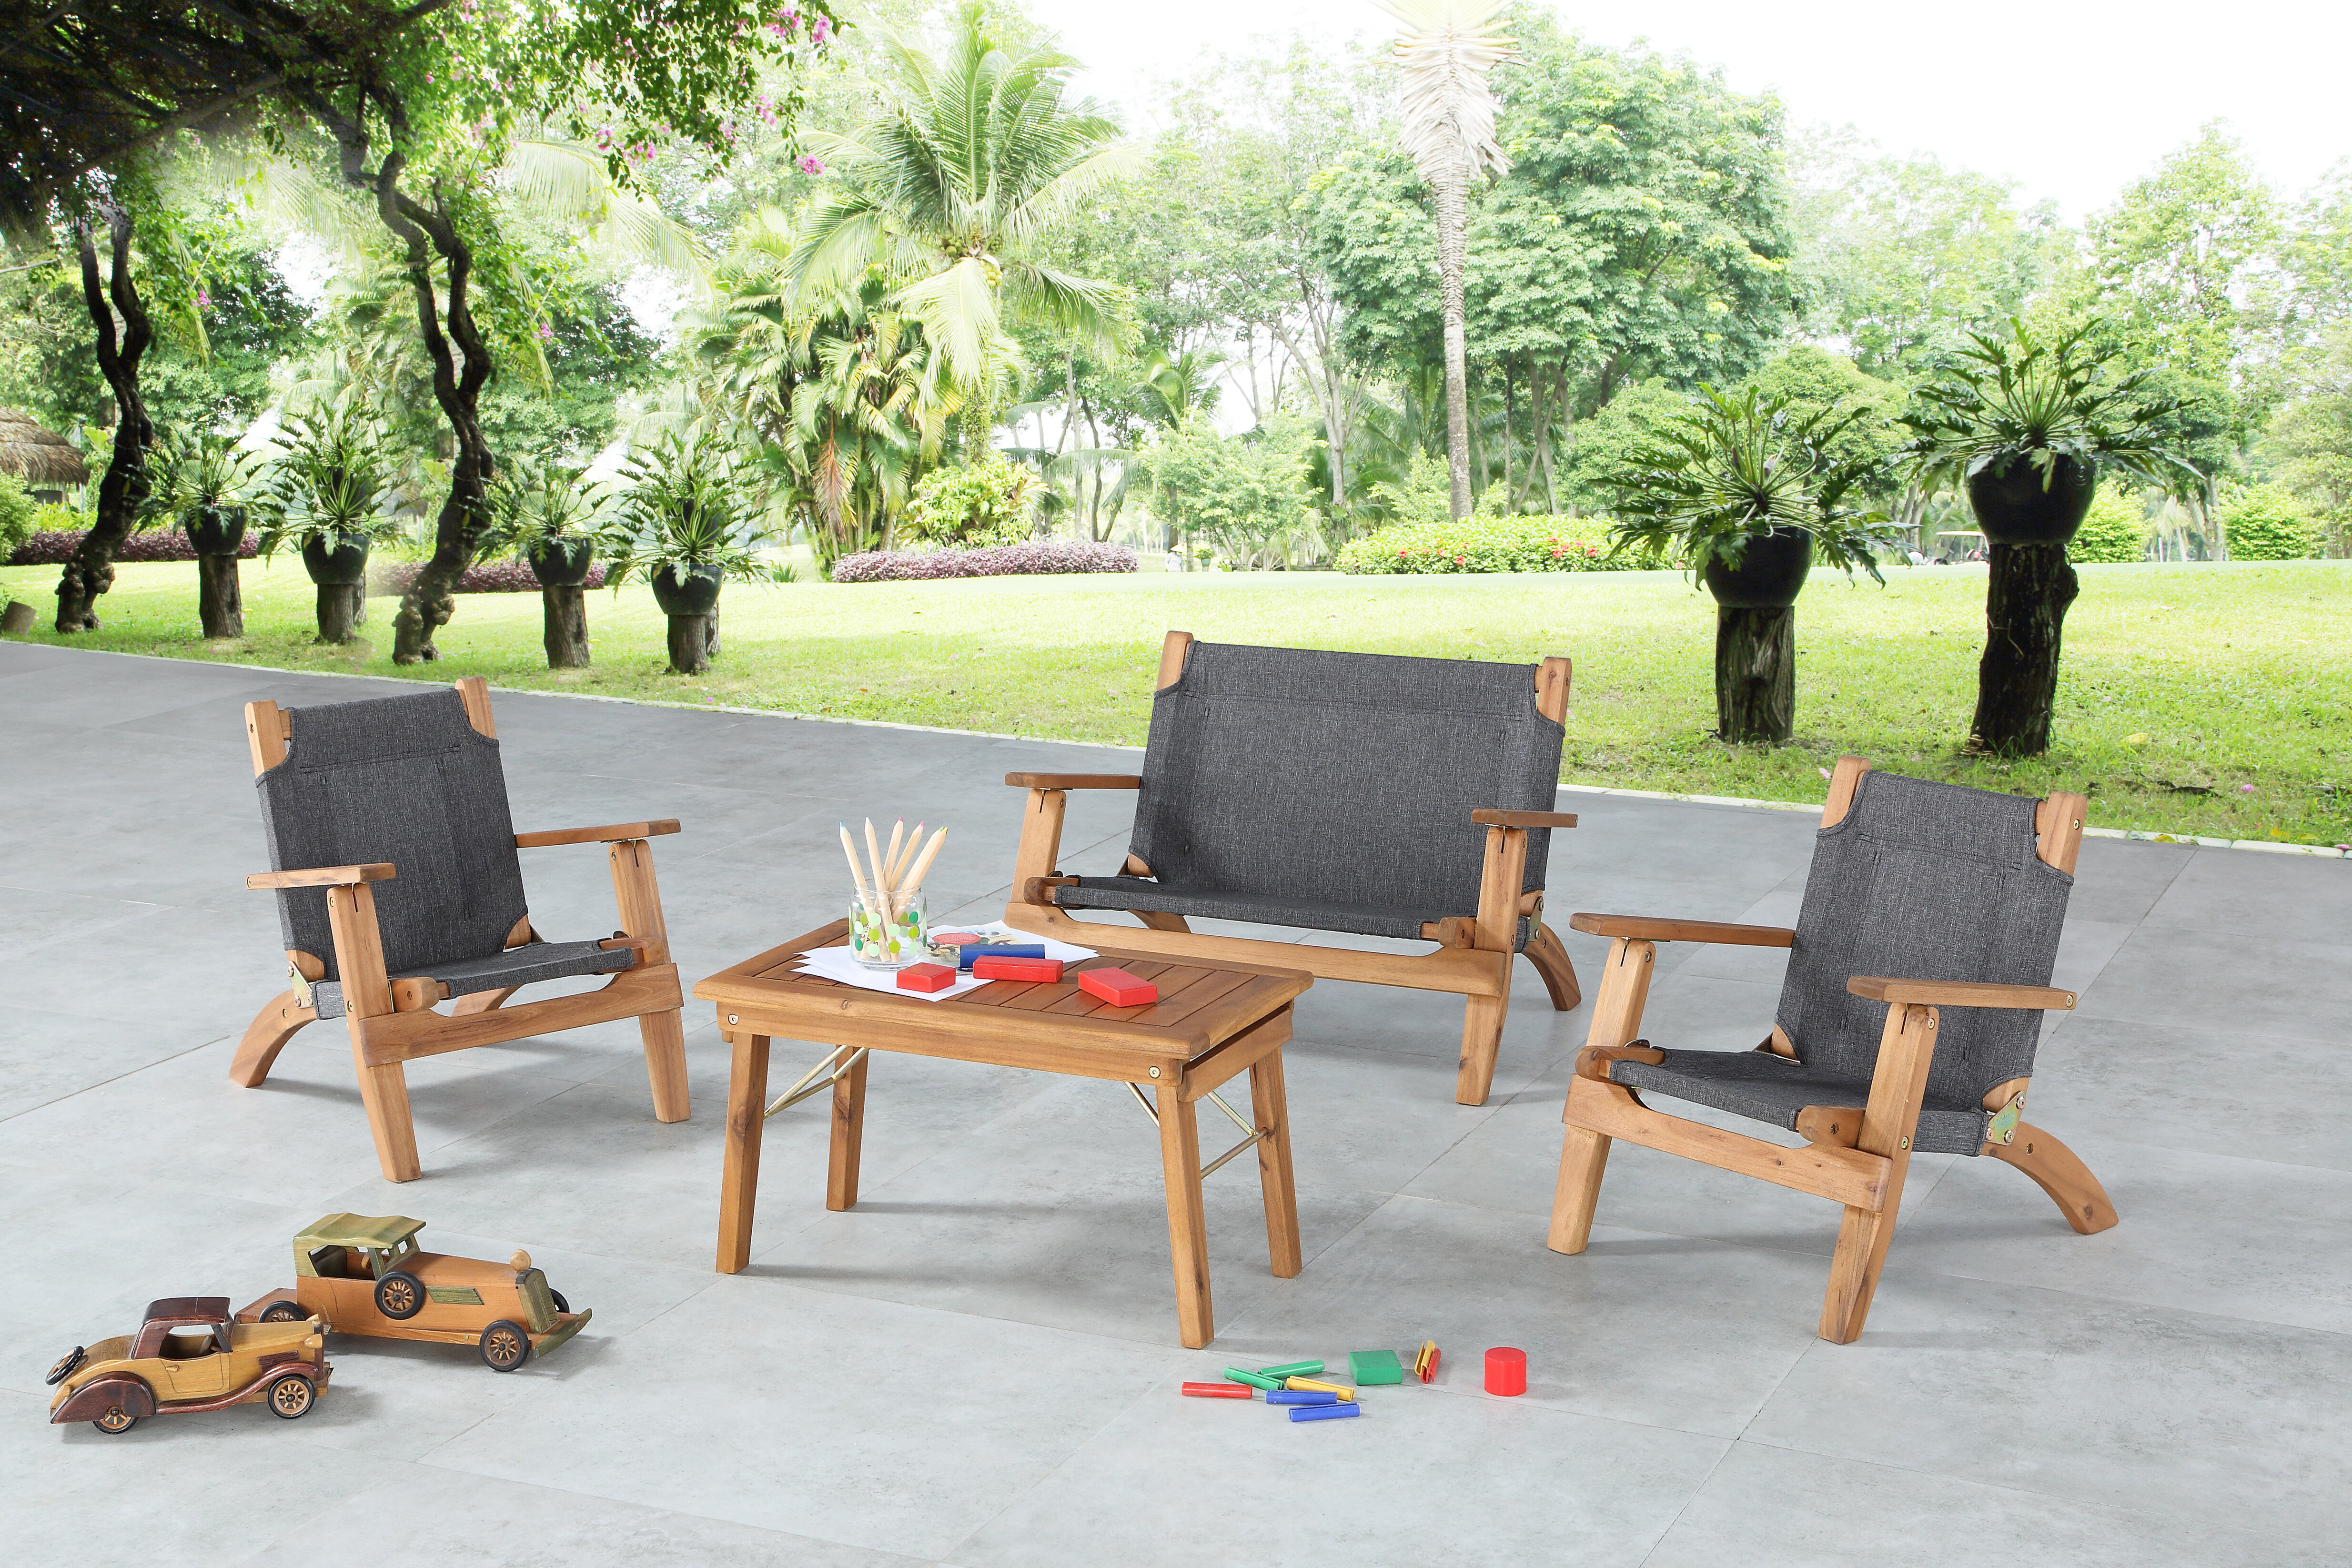 kids outdoor chairs